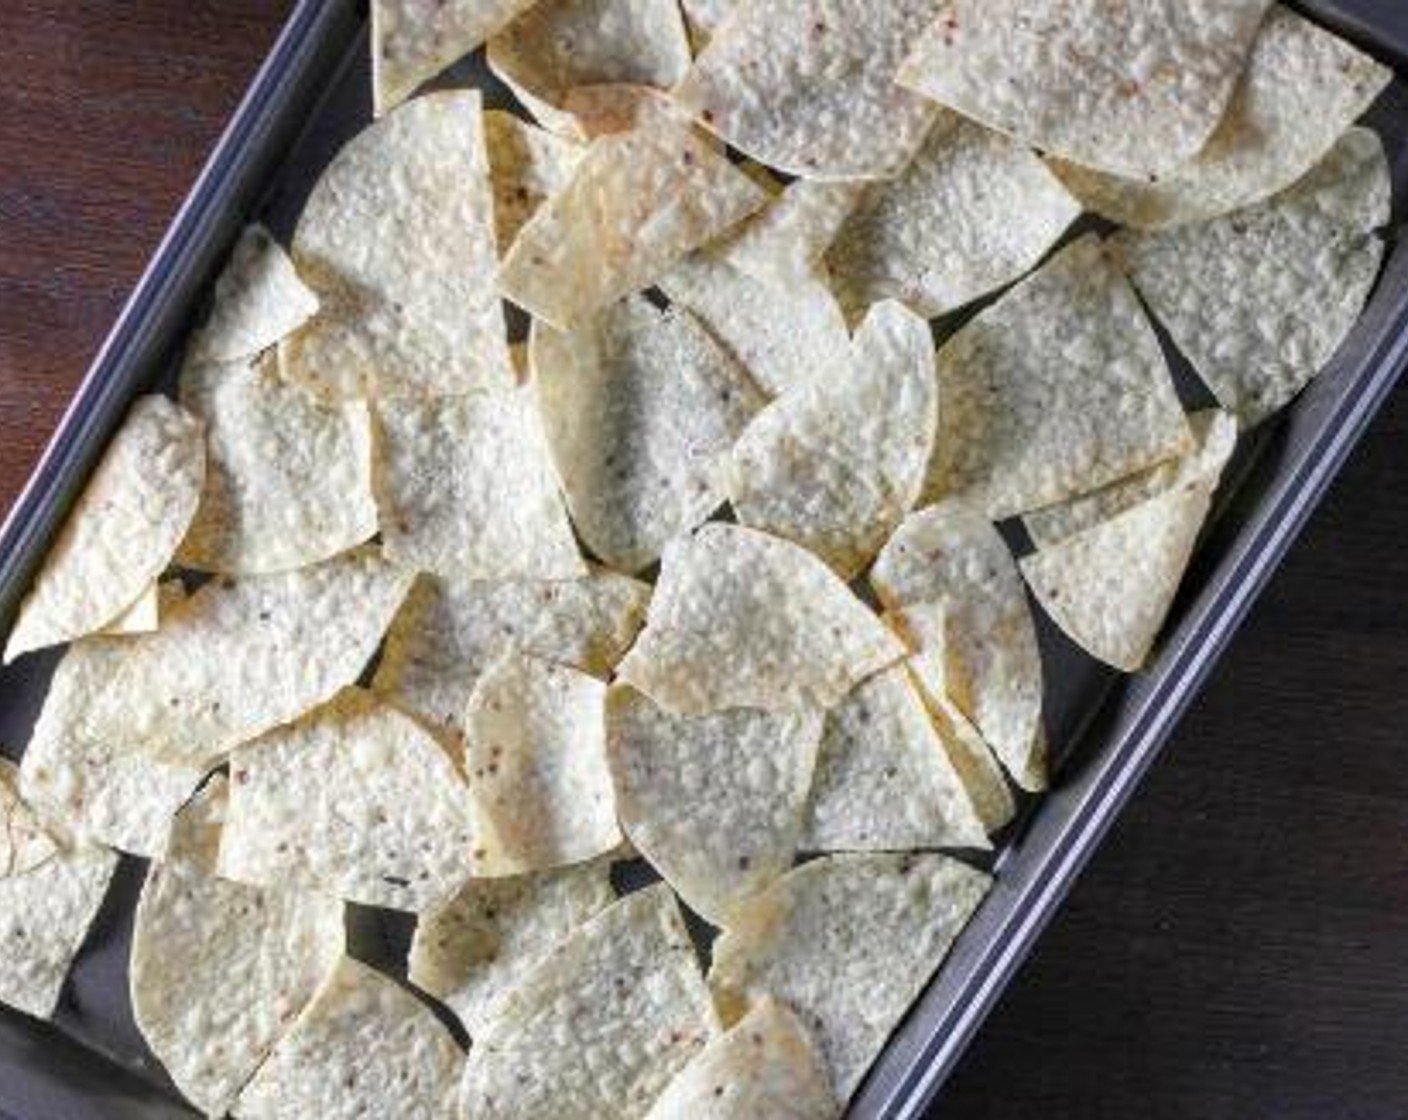 step 1 On a large baking sheet, spread the Restaurant Style Tortilla Chips (10 cups) out in an even layer as best as you can. Cover the chips with Refried Beans (1 3/4 cups), Canned Black Beans (2 1/3 cups) and Canned Sweet Corn (2 2/3 cups).